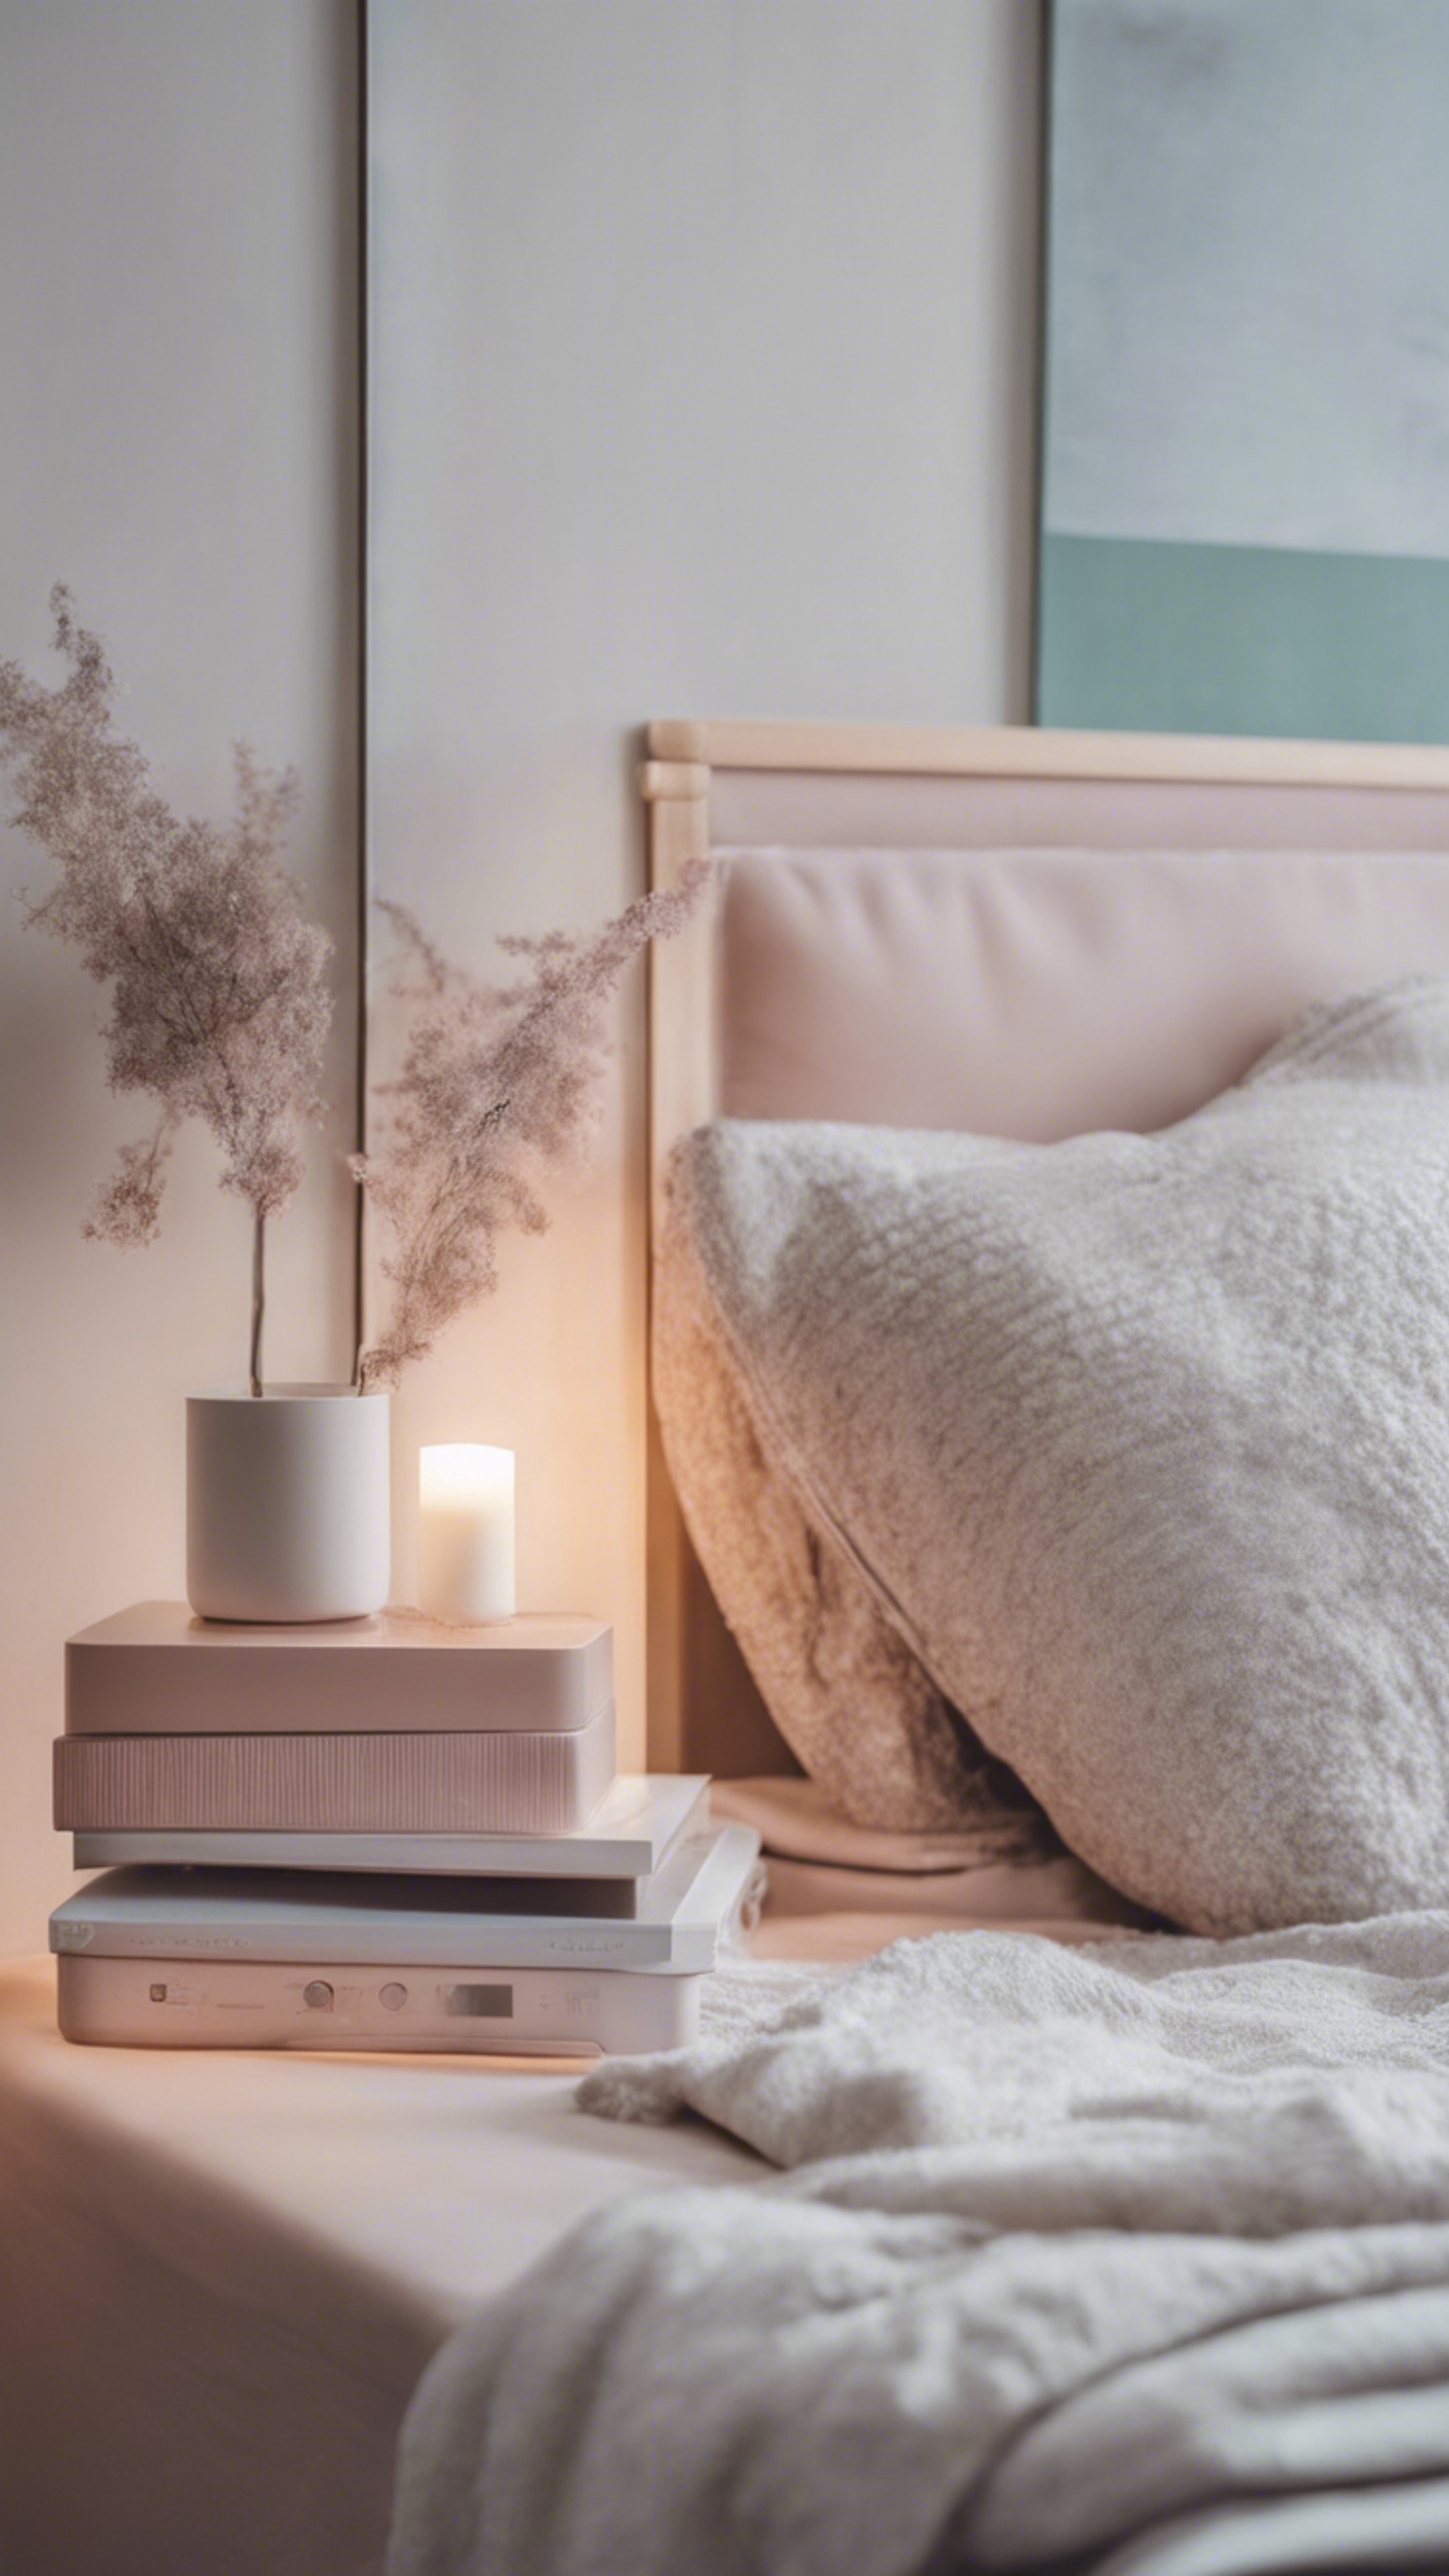 A modern minimalist bedroom in pastel hues with cozy blankets and a stylish bedside table. Tapeta[e12df14007a0419d89d8]